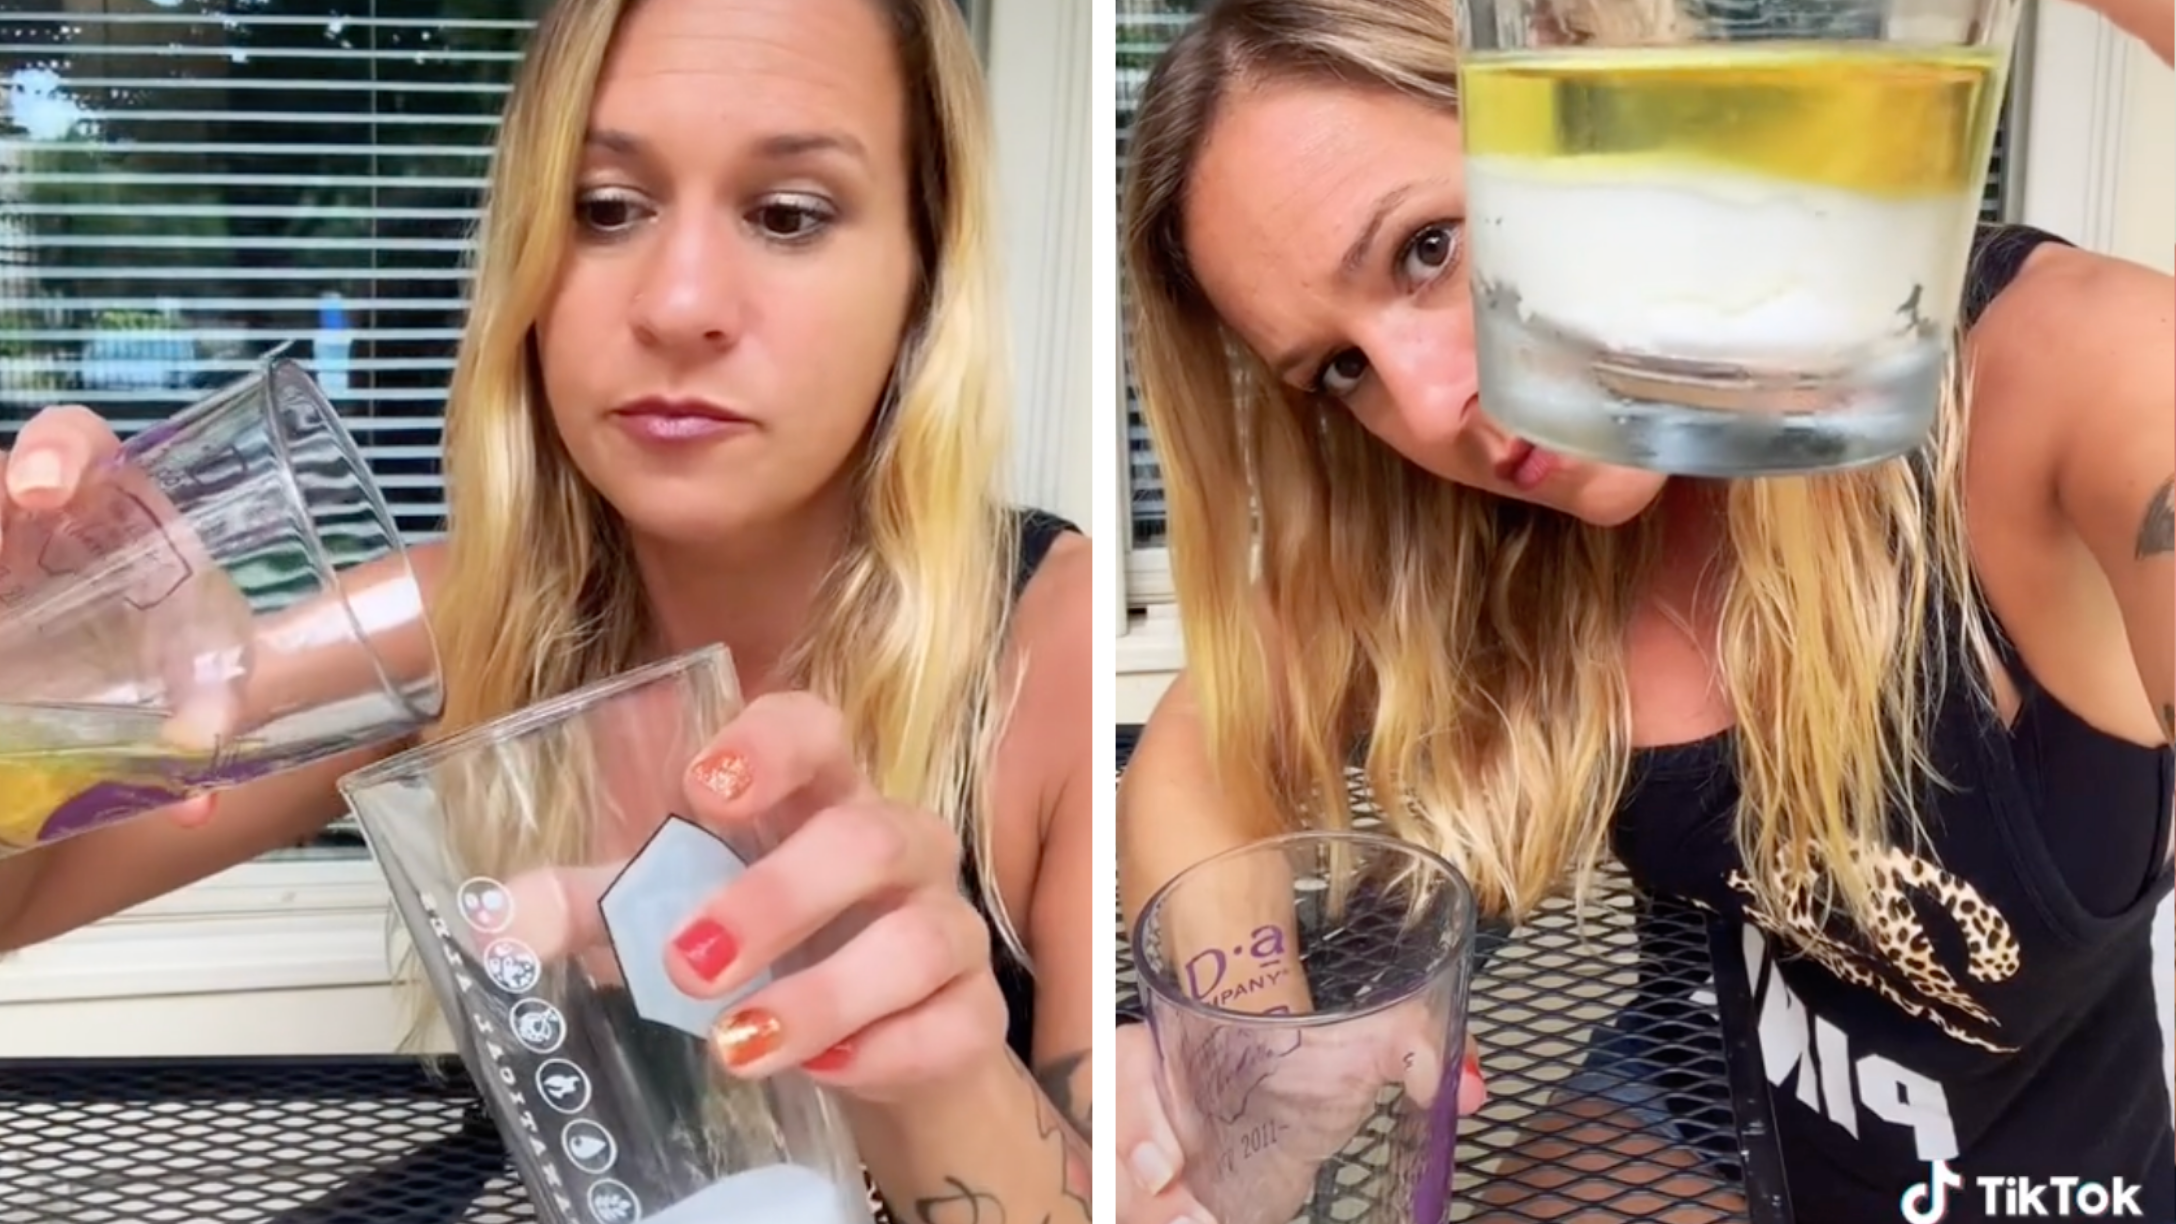 Woman Does Fizzy Pee Cup Test To See If Shes Having Boy or Girl and TikTok Has Questions CafeMom image image